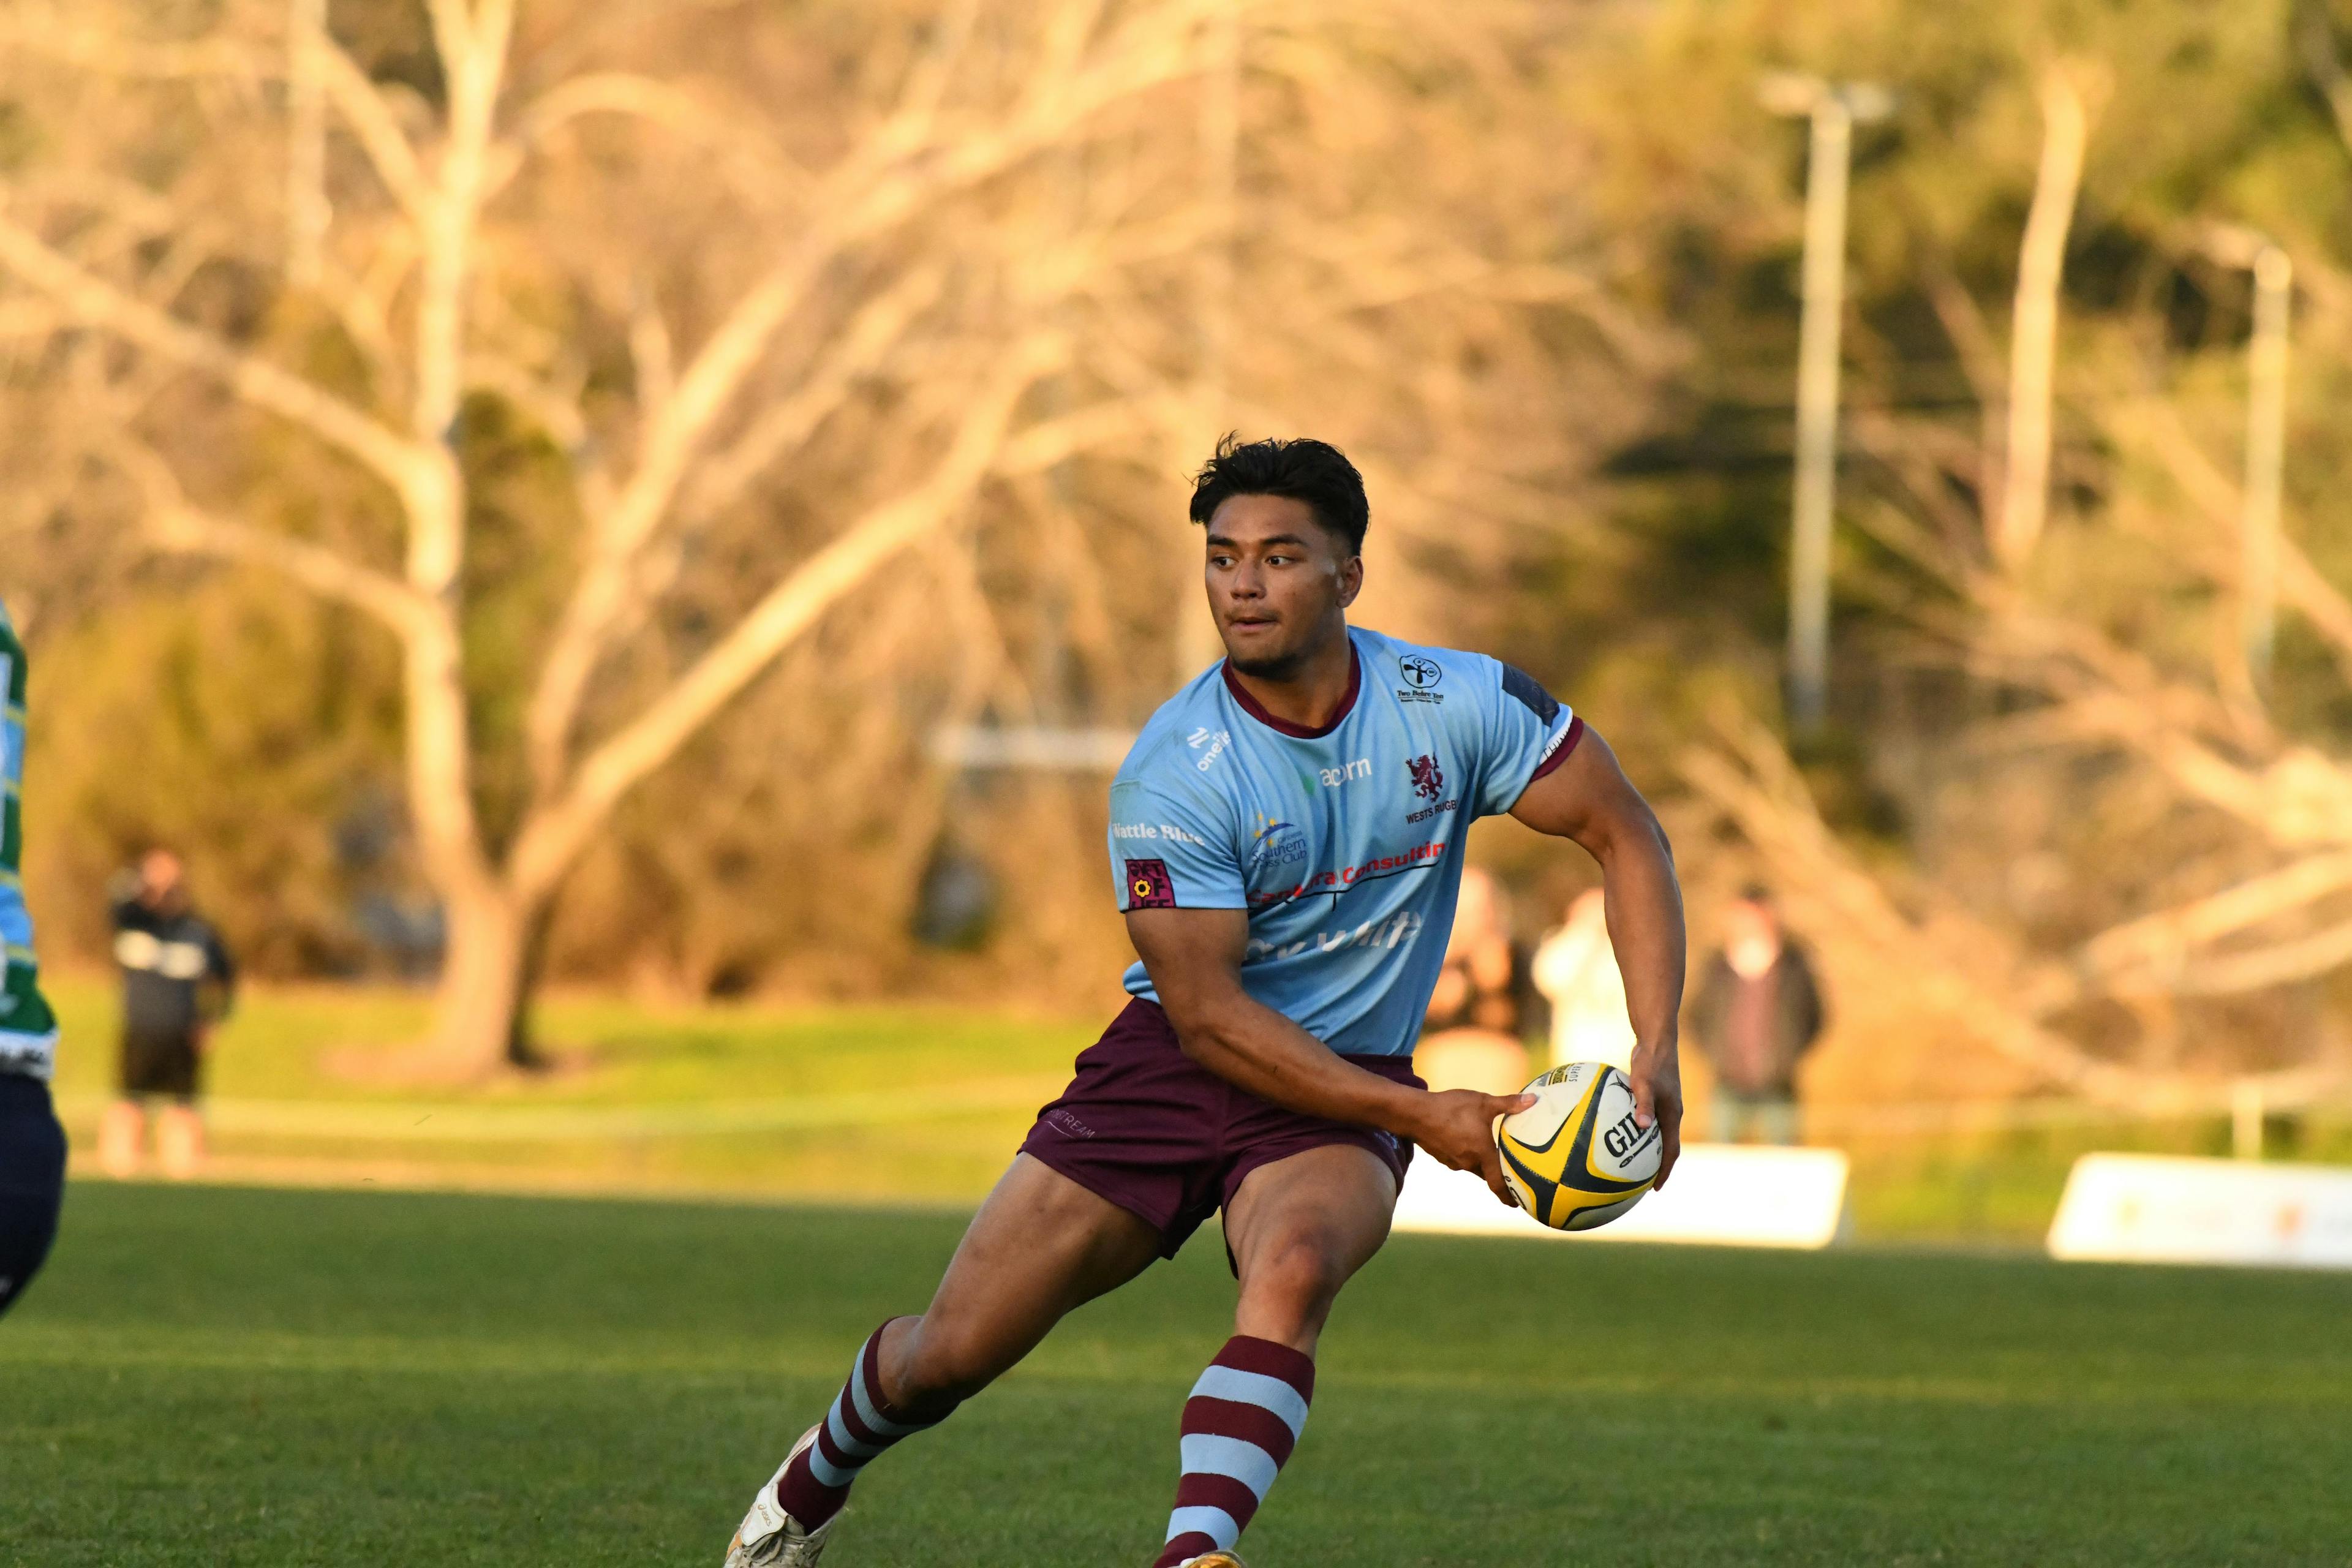 Oryaan Kalolo of the Wests Lions, photo by Lachlan Lawson photography.